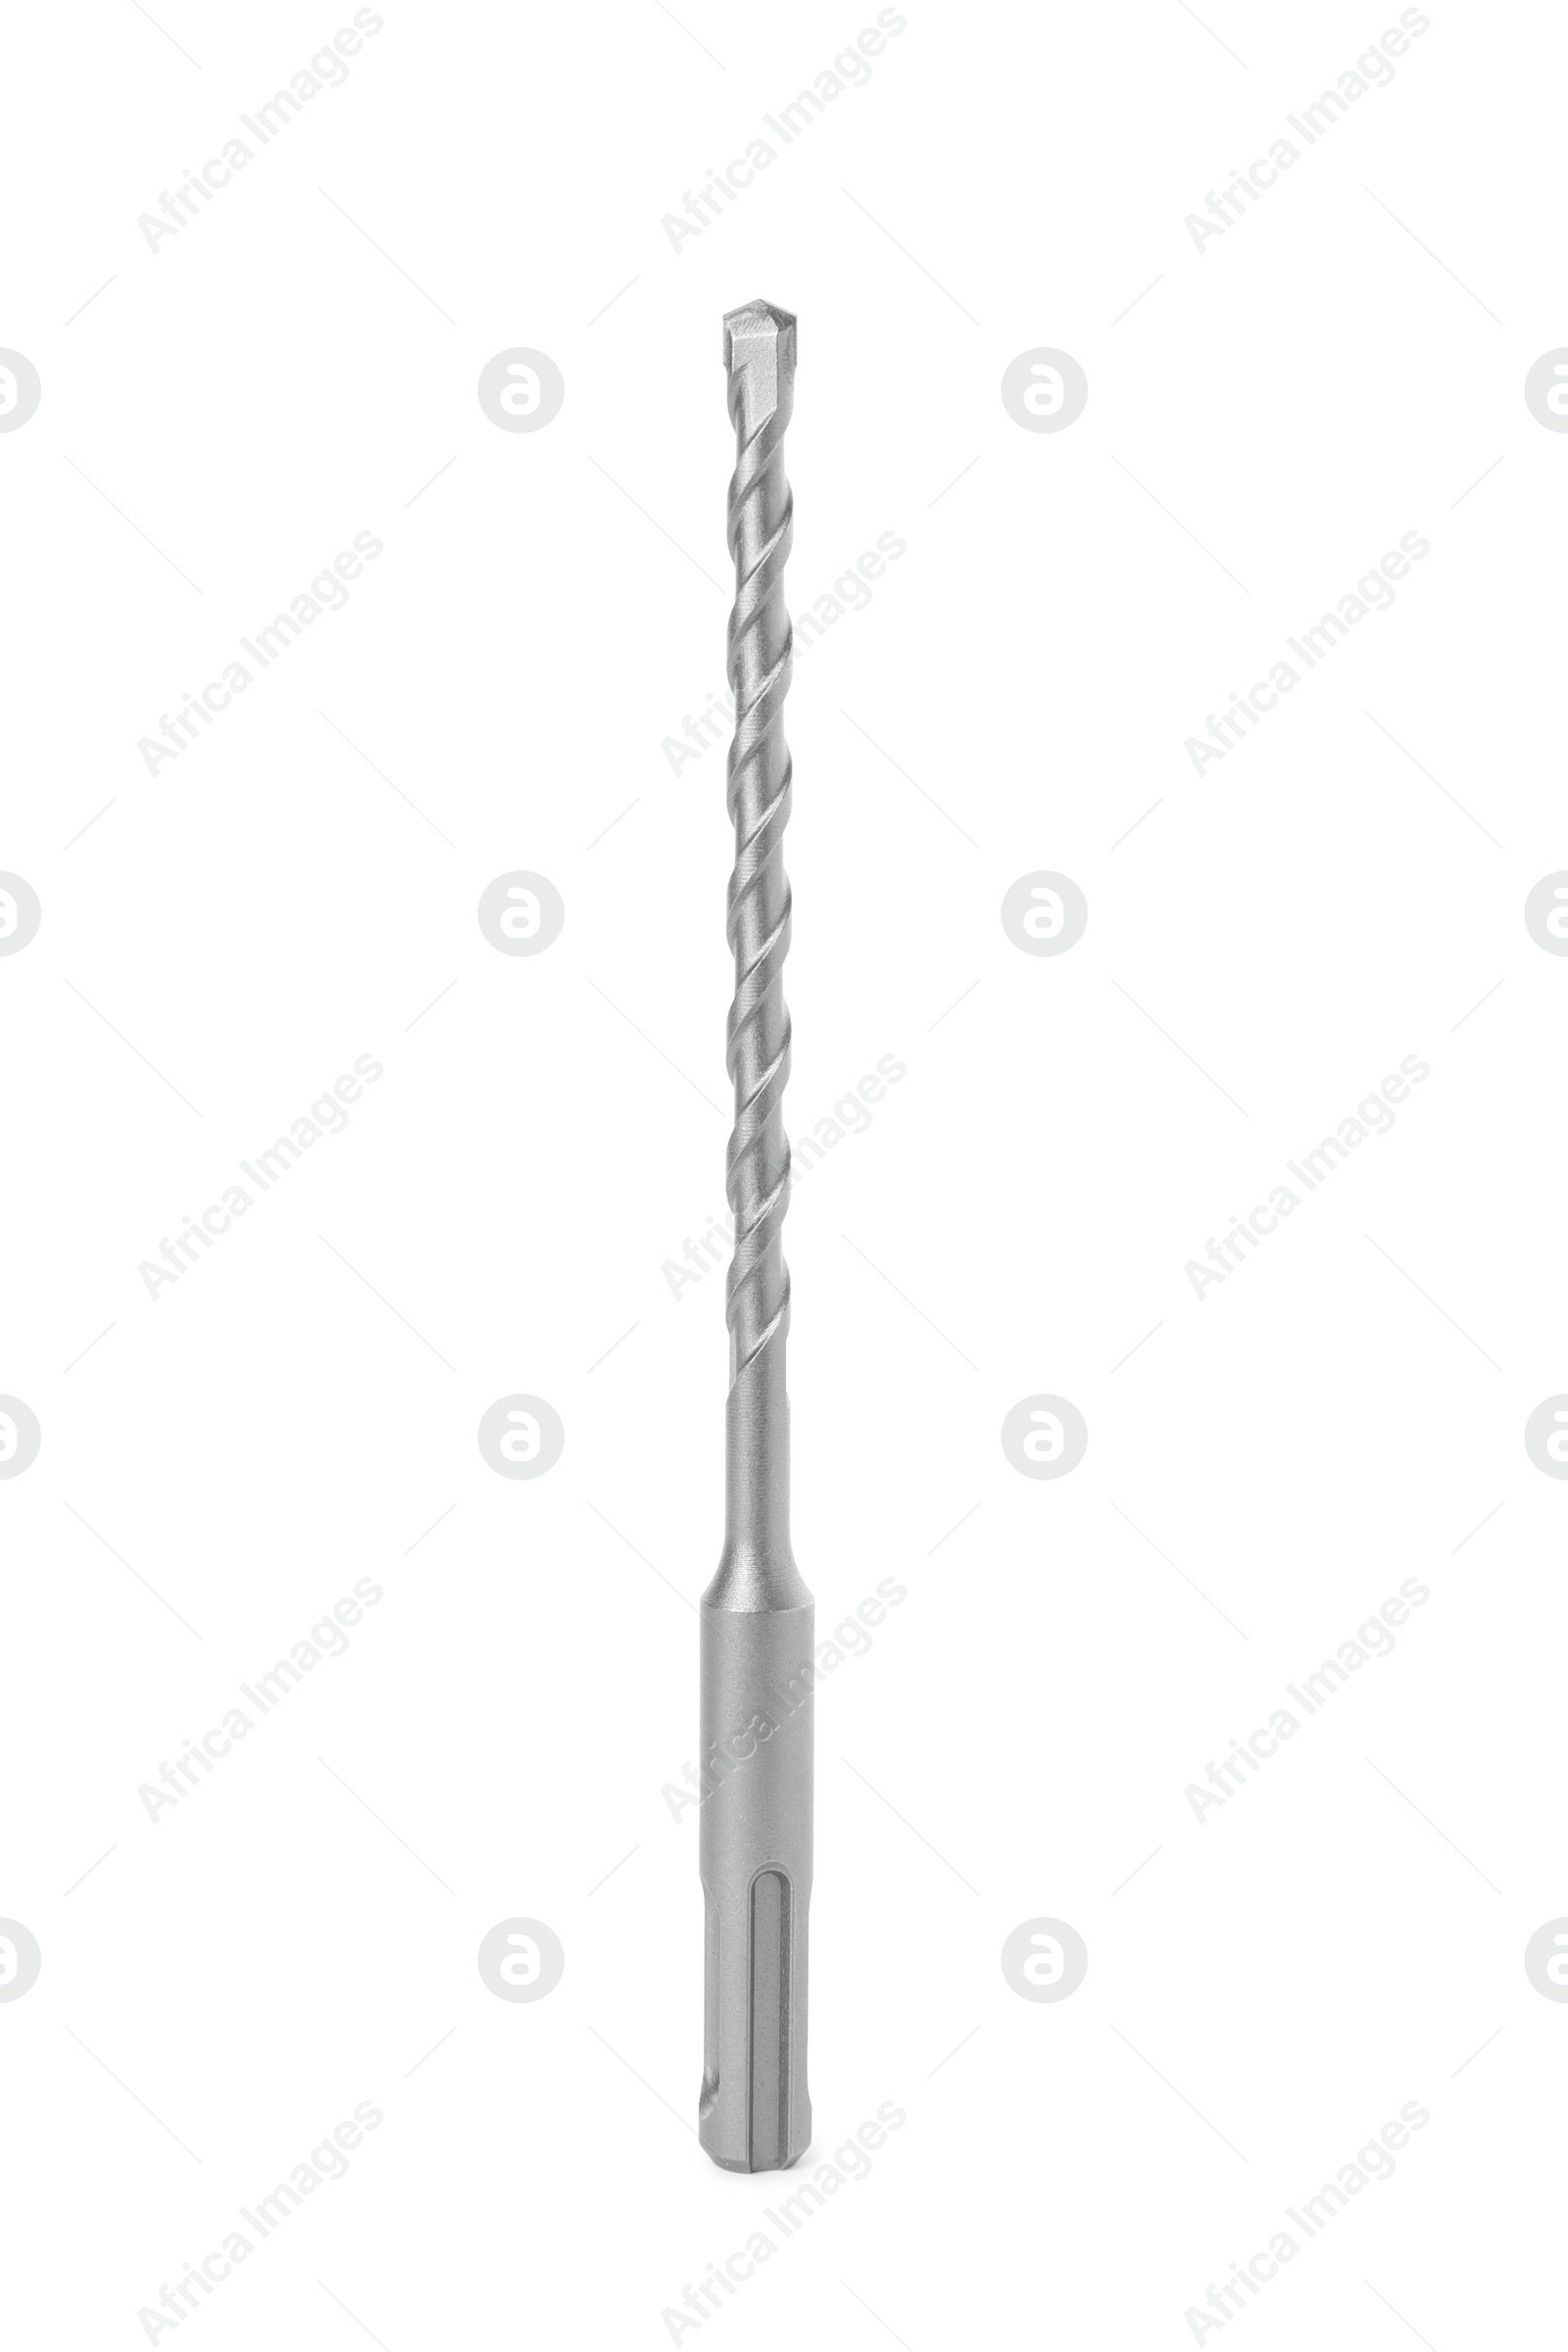 Photo of One twist drill bit isolated on white. Carpenter's tool